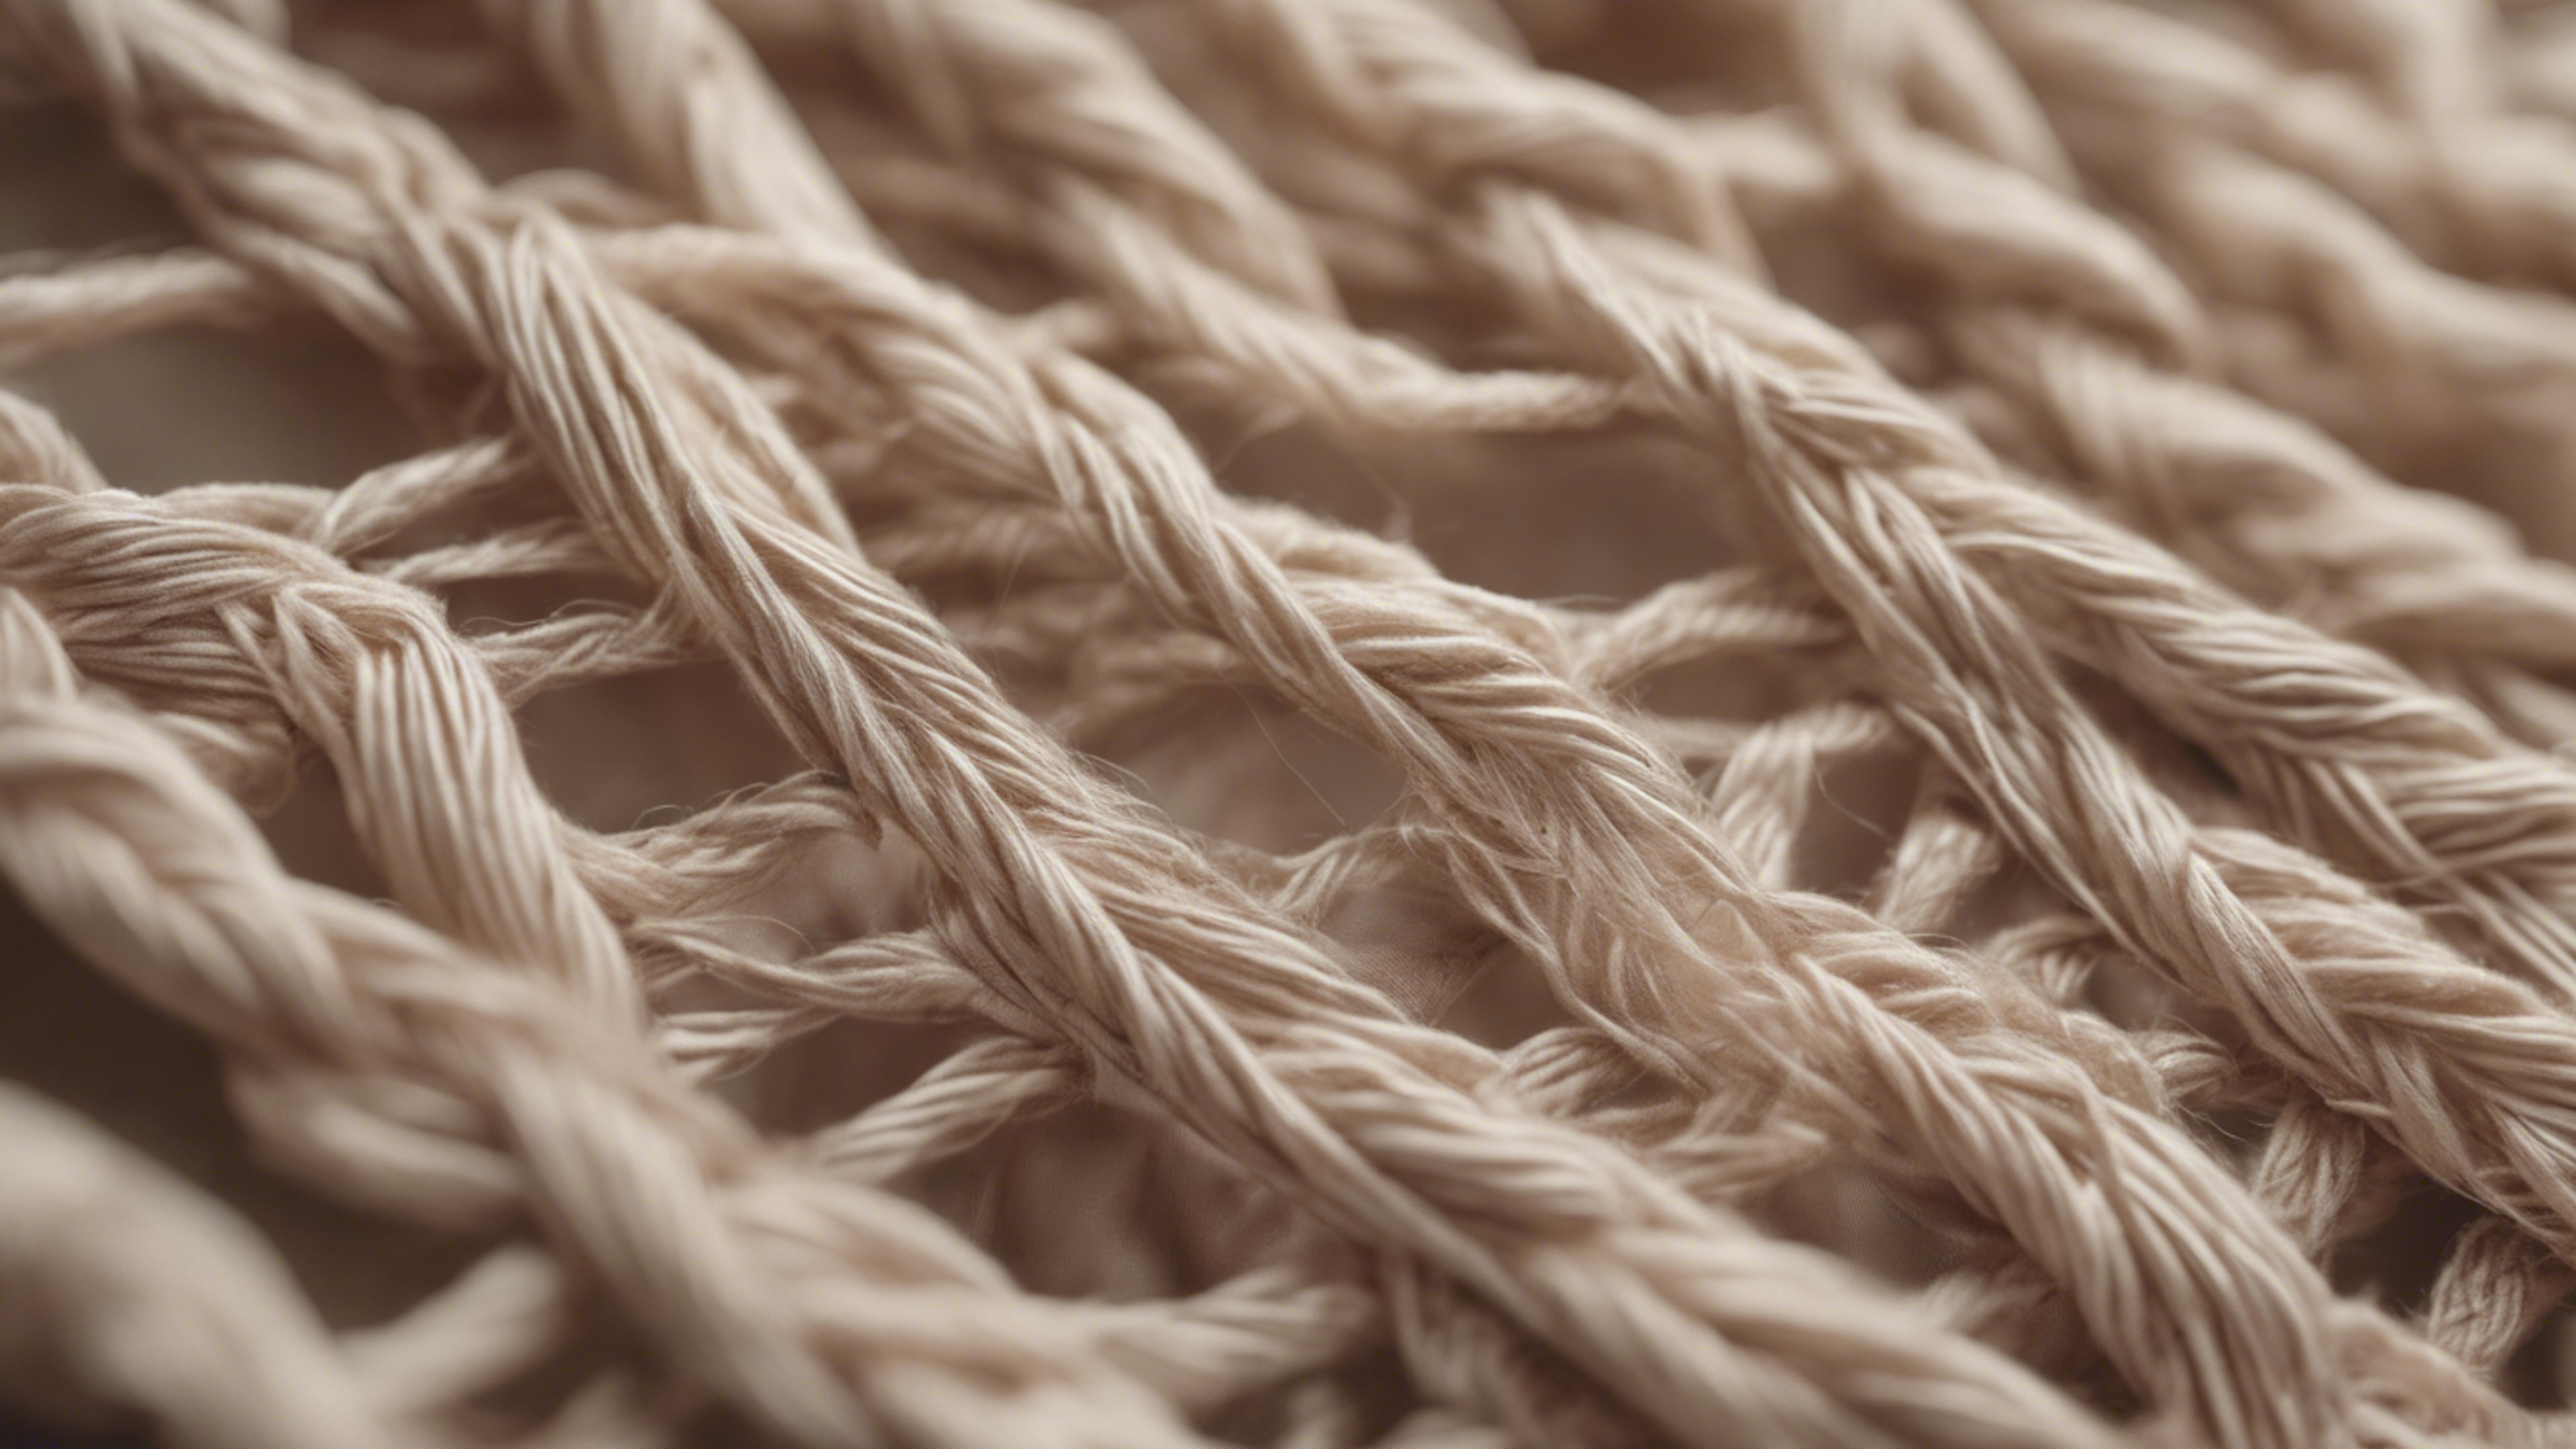 A close-up of cool beige threads interweaving to form a unique, patterned fabric.壁紙[e47f0bd142b54d48a5a0]